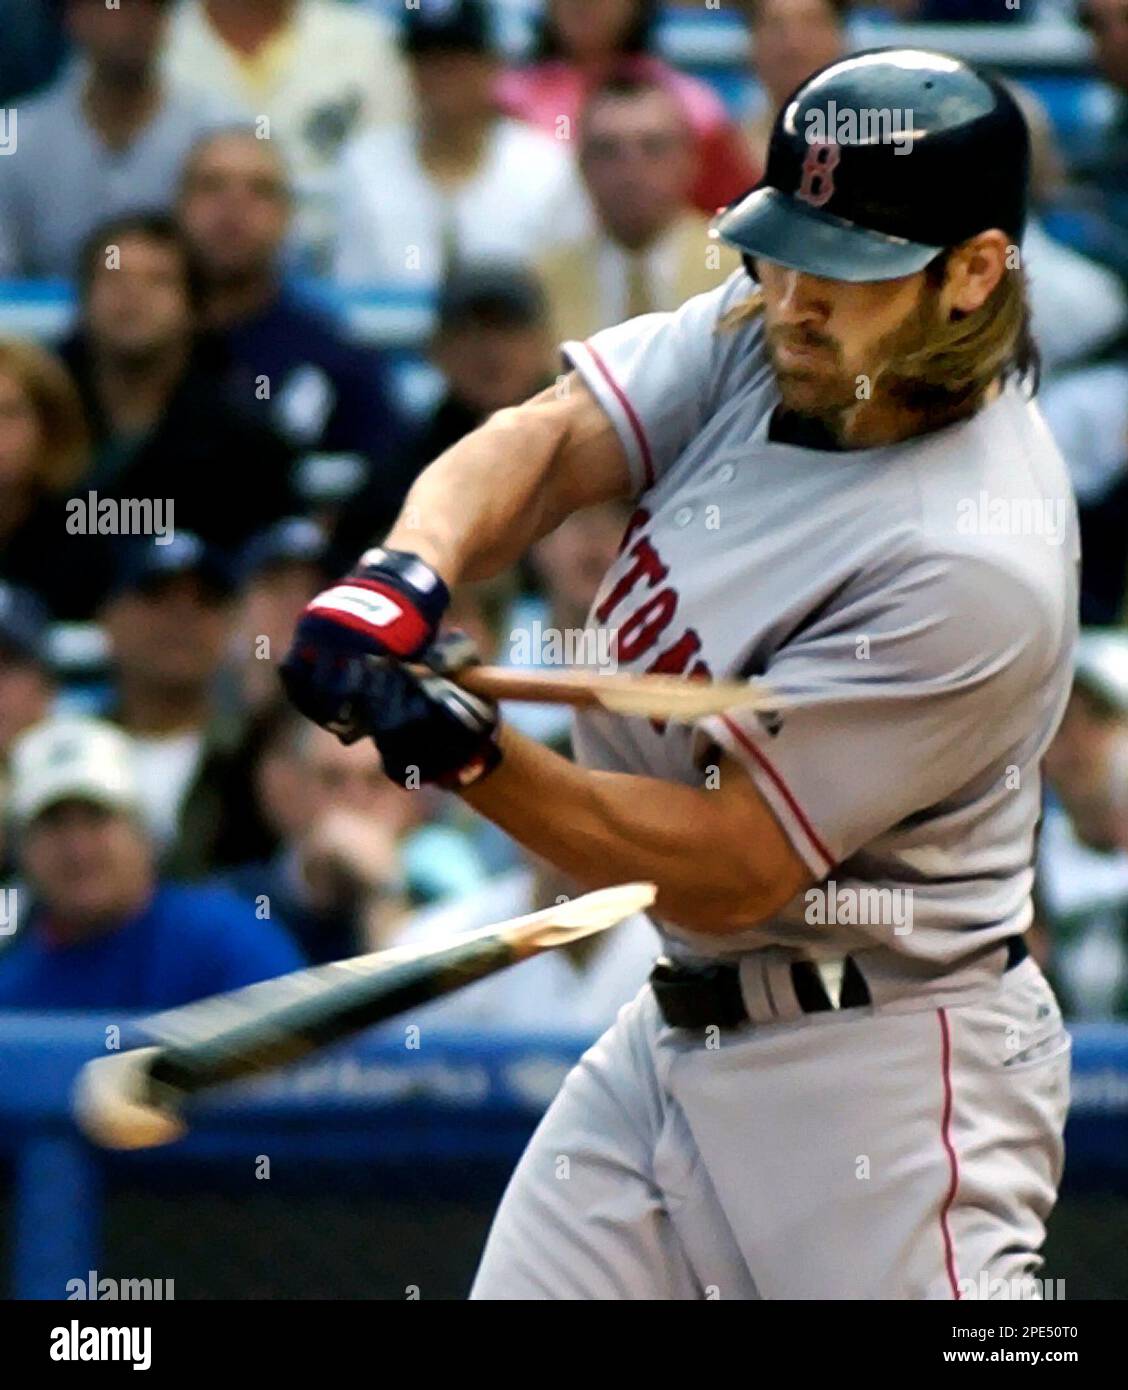 Boston Red Sox batter Johnny Damon breaks his bat on a pitch by